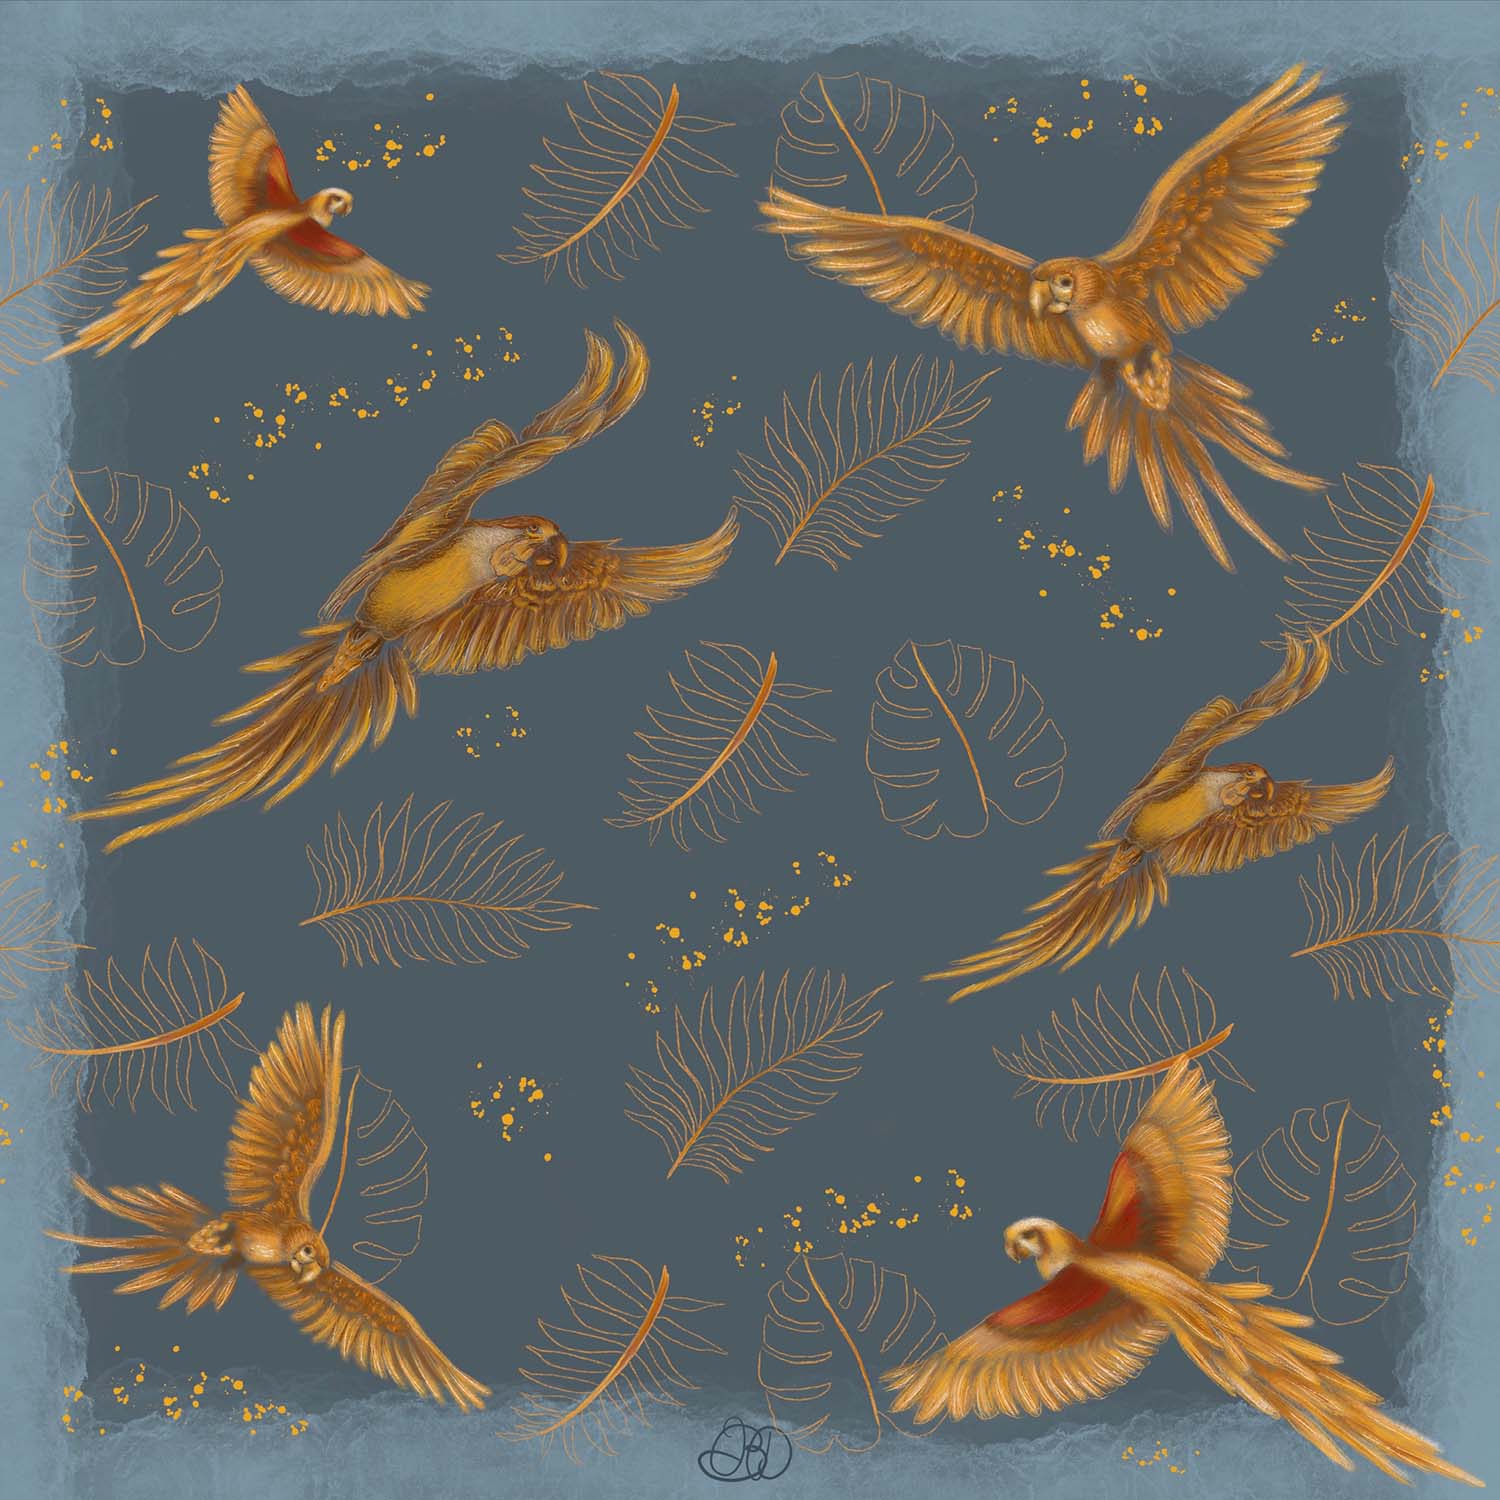 Golden Parrots Grey and Silver Silk Square Scarf